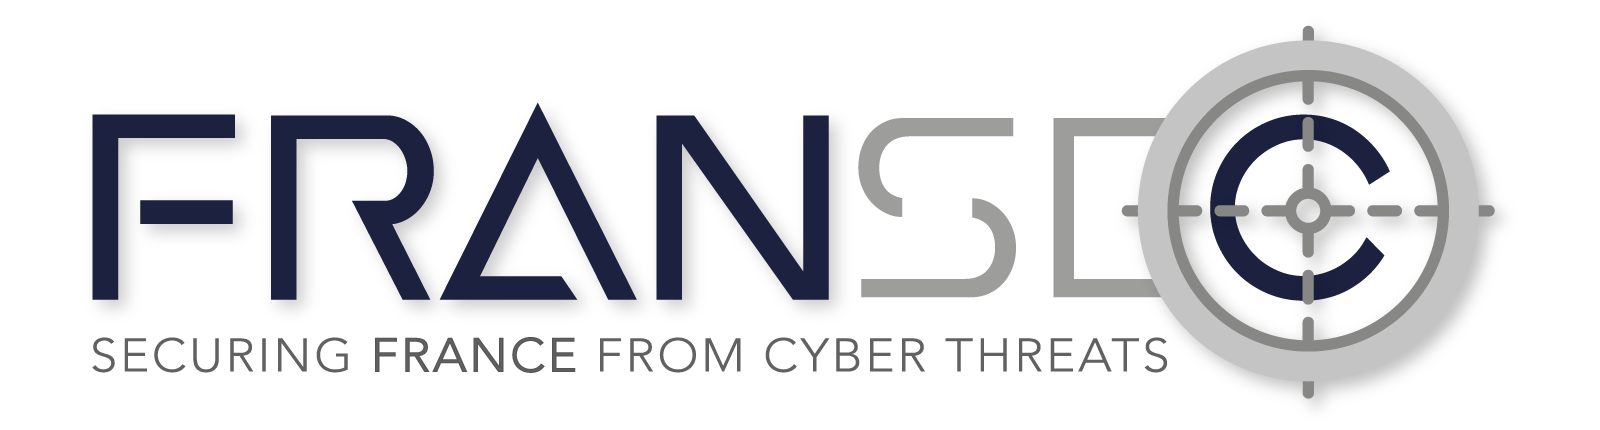 FranSec: Cyber Security Conference